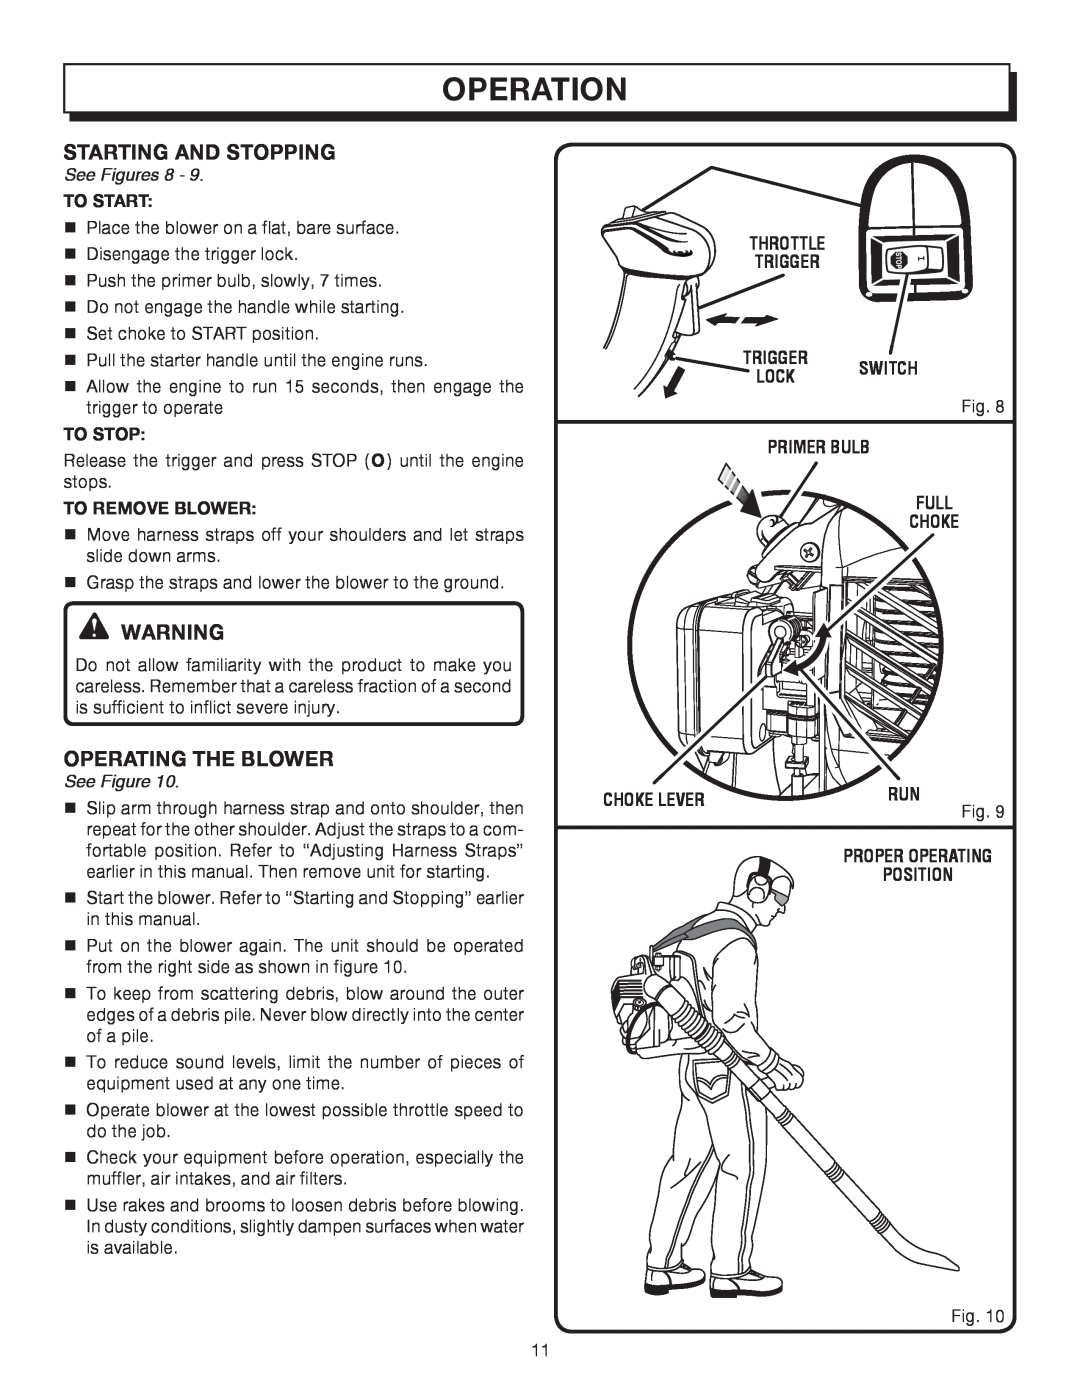 Homelite UT08072 manual Operation, See Figures, To Start, To Stop, To Remove Blower, Throttle Trigger Trigger Switch Lock 